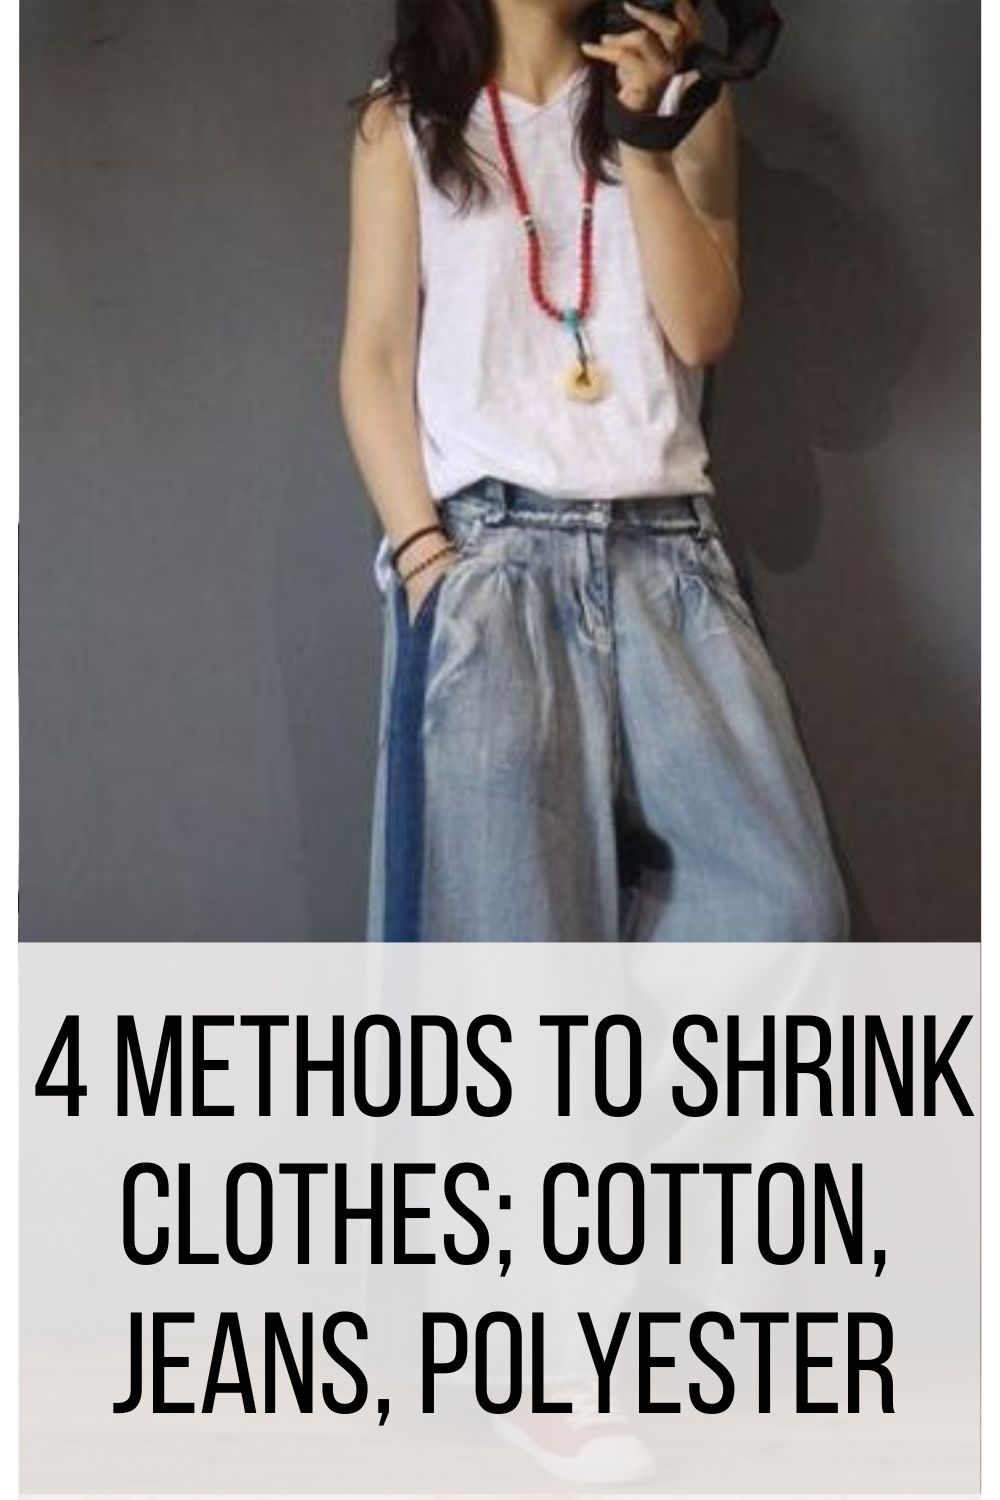 4 Methods to Shrink Clothes; Cotton, Jeans, Polyester